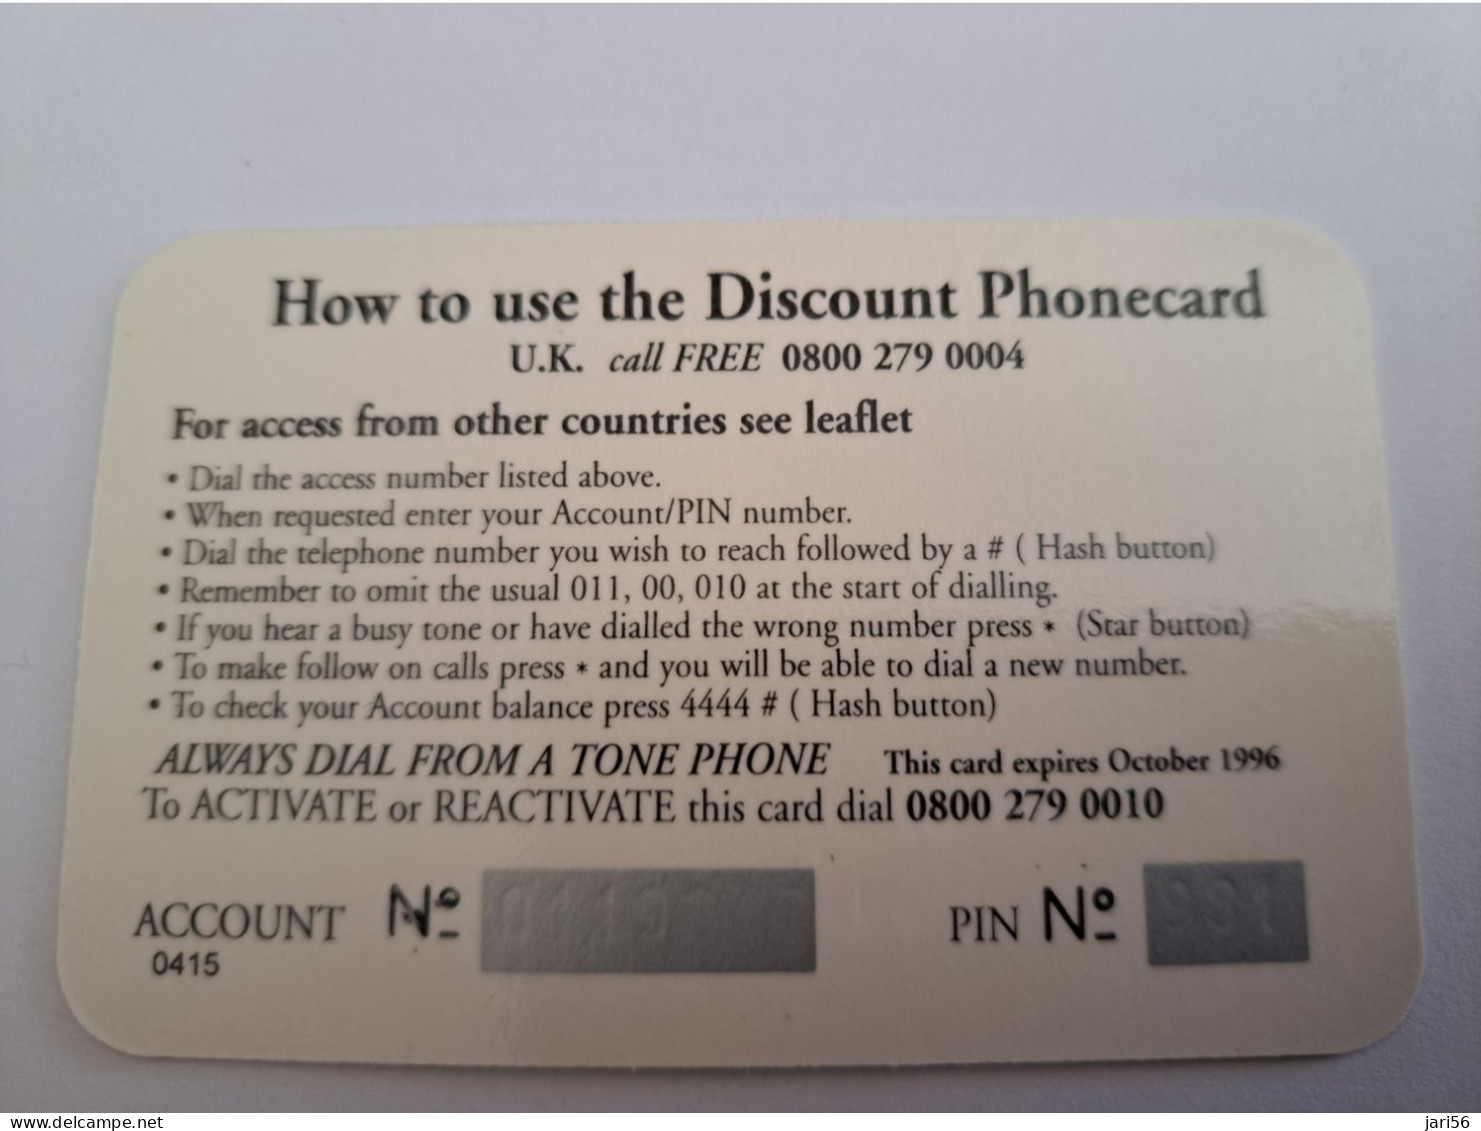 GREAT BRITAIN  / DISCOUNT PHONECARD/BUTTERFLY / 75 PENCE    PREPAID CARD / MINT      **13588** - Collezioni